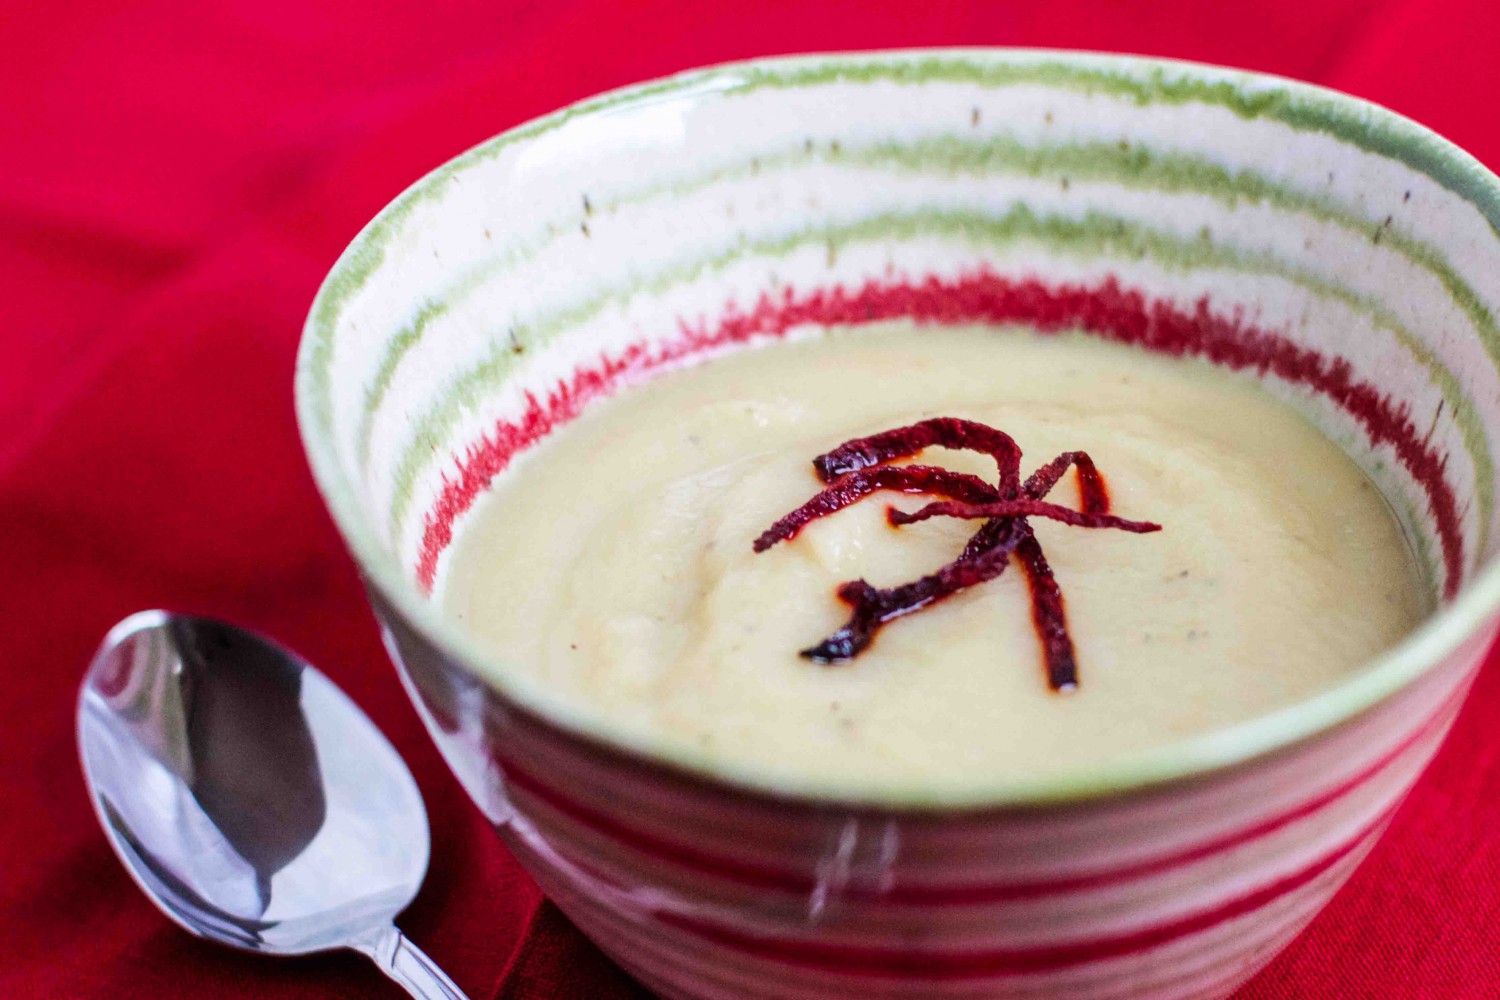 Parsnip and Celeriac Soup with Fried Beet Matchsticks (plus Giveaway)